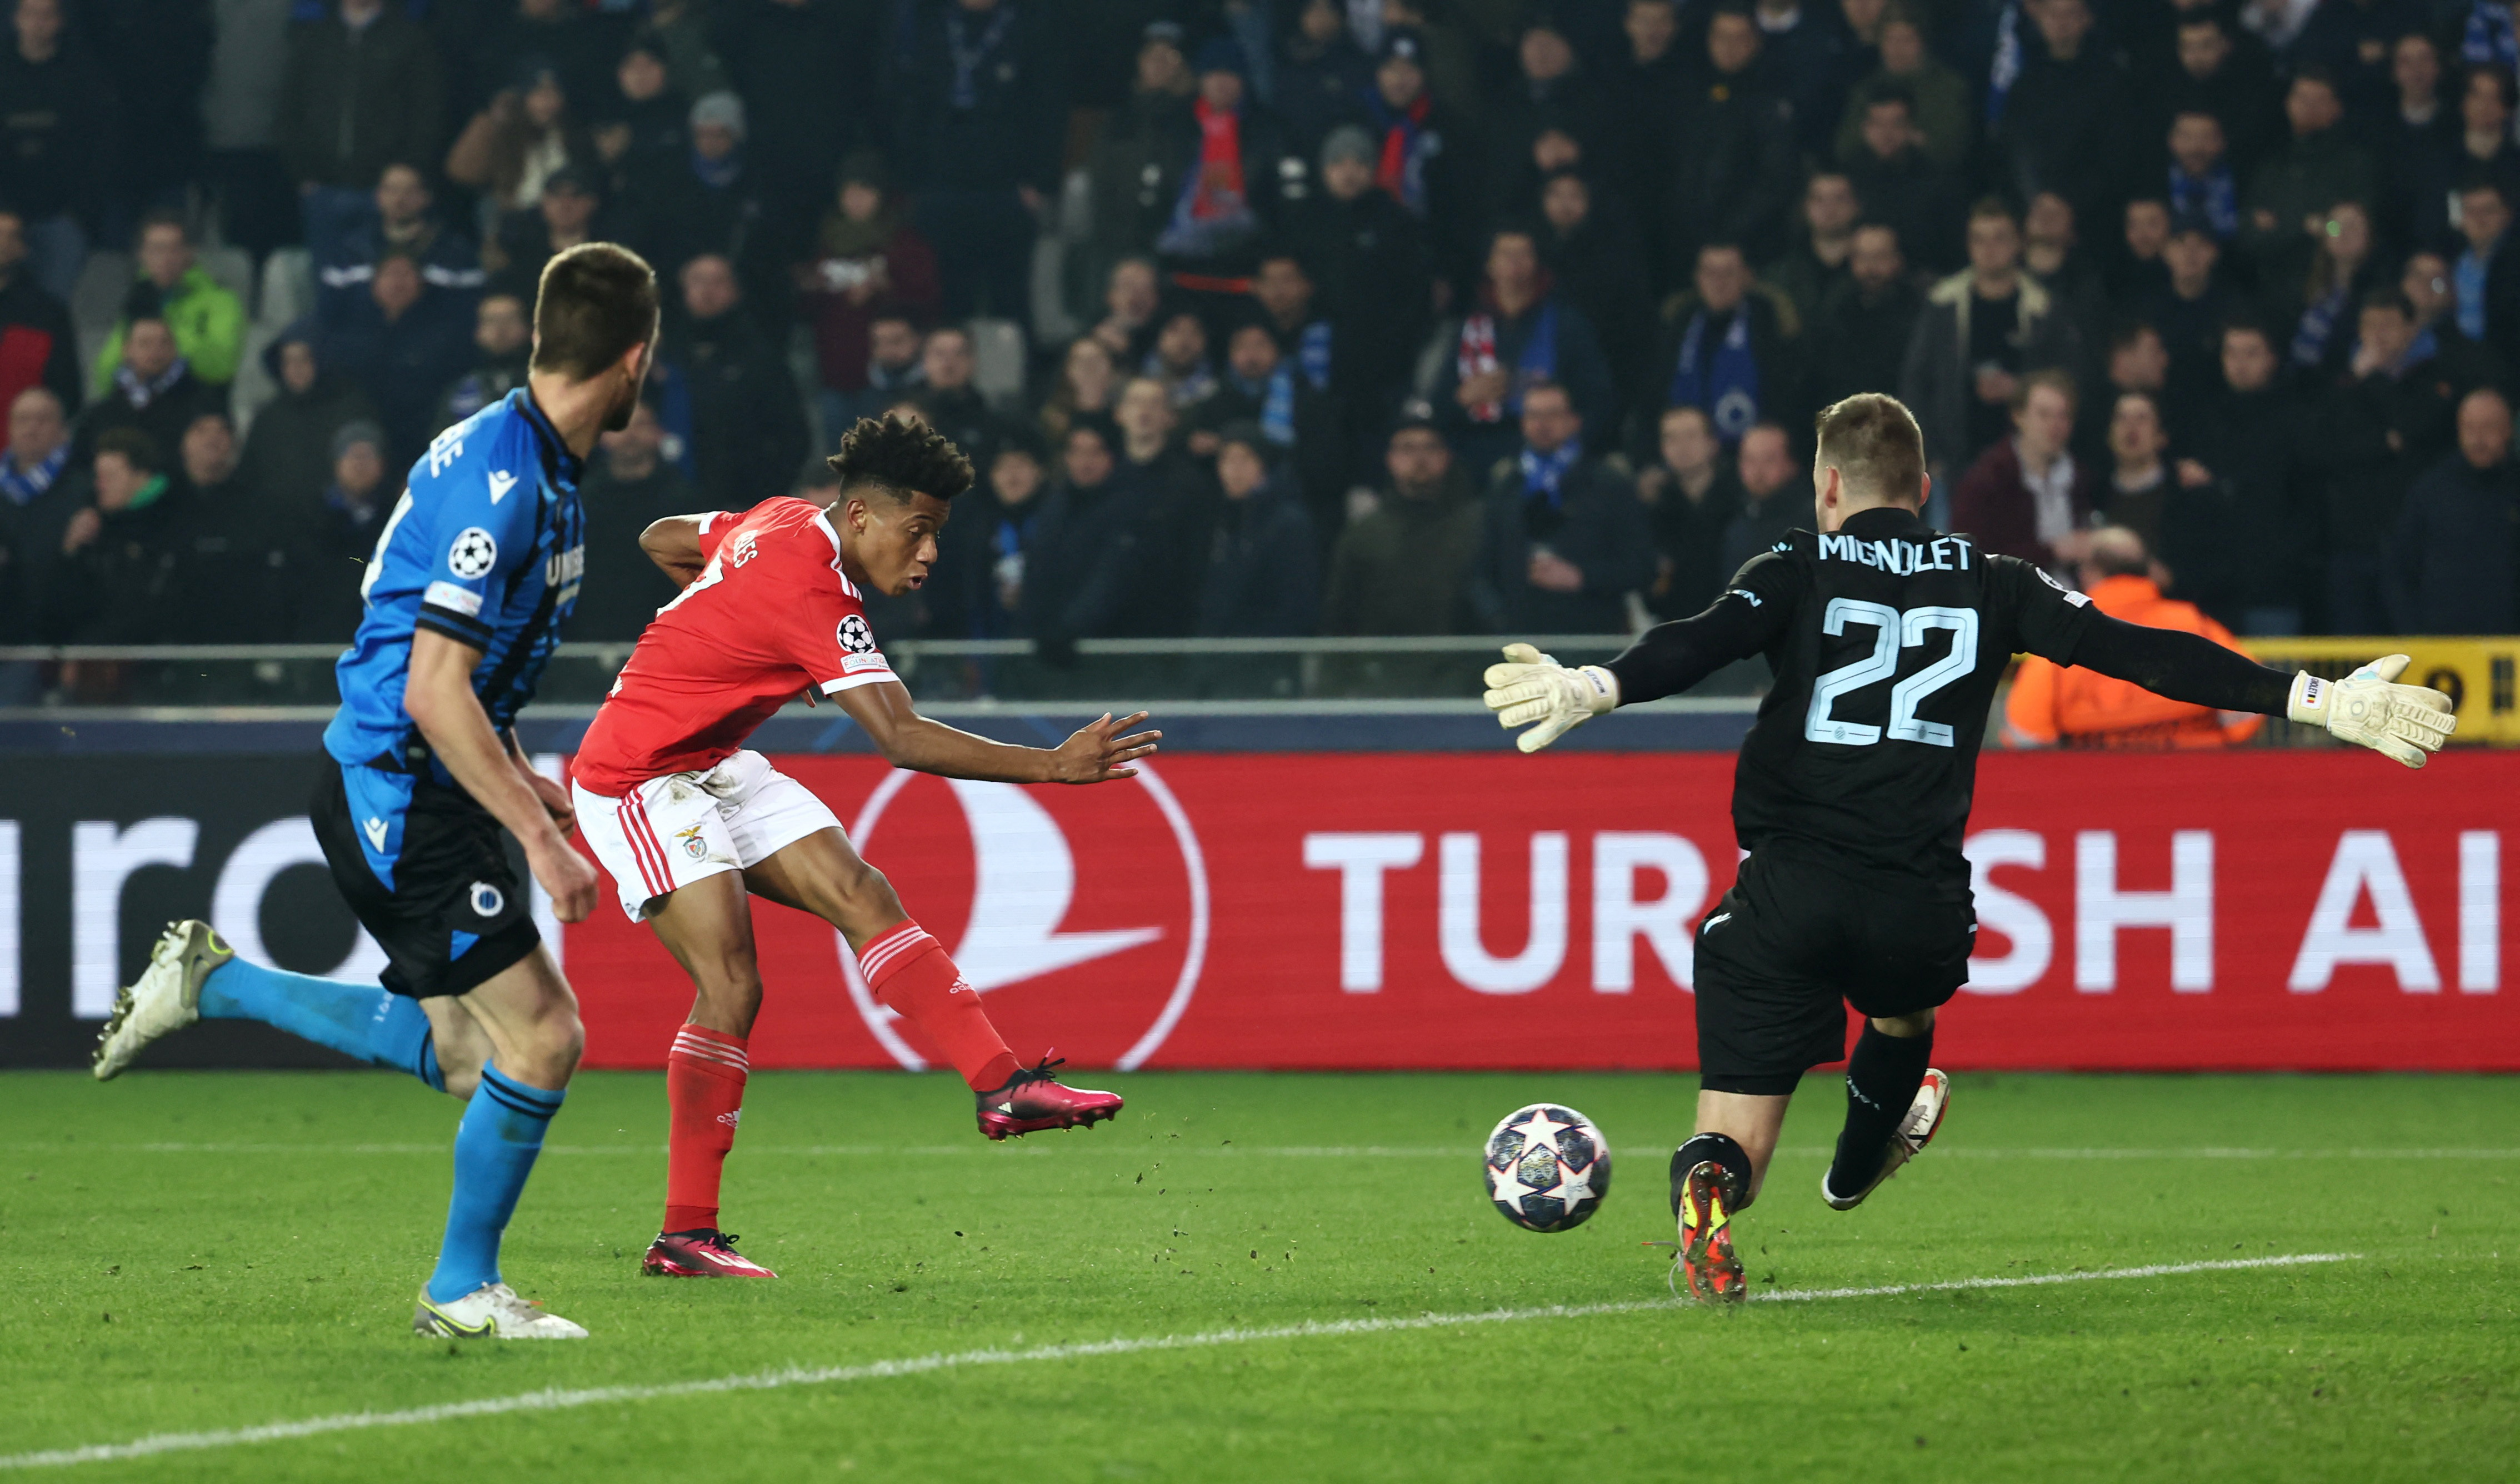 Club Brugge thrashed by Benfica in humiliating Champions League exit